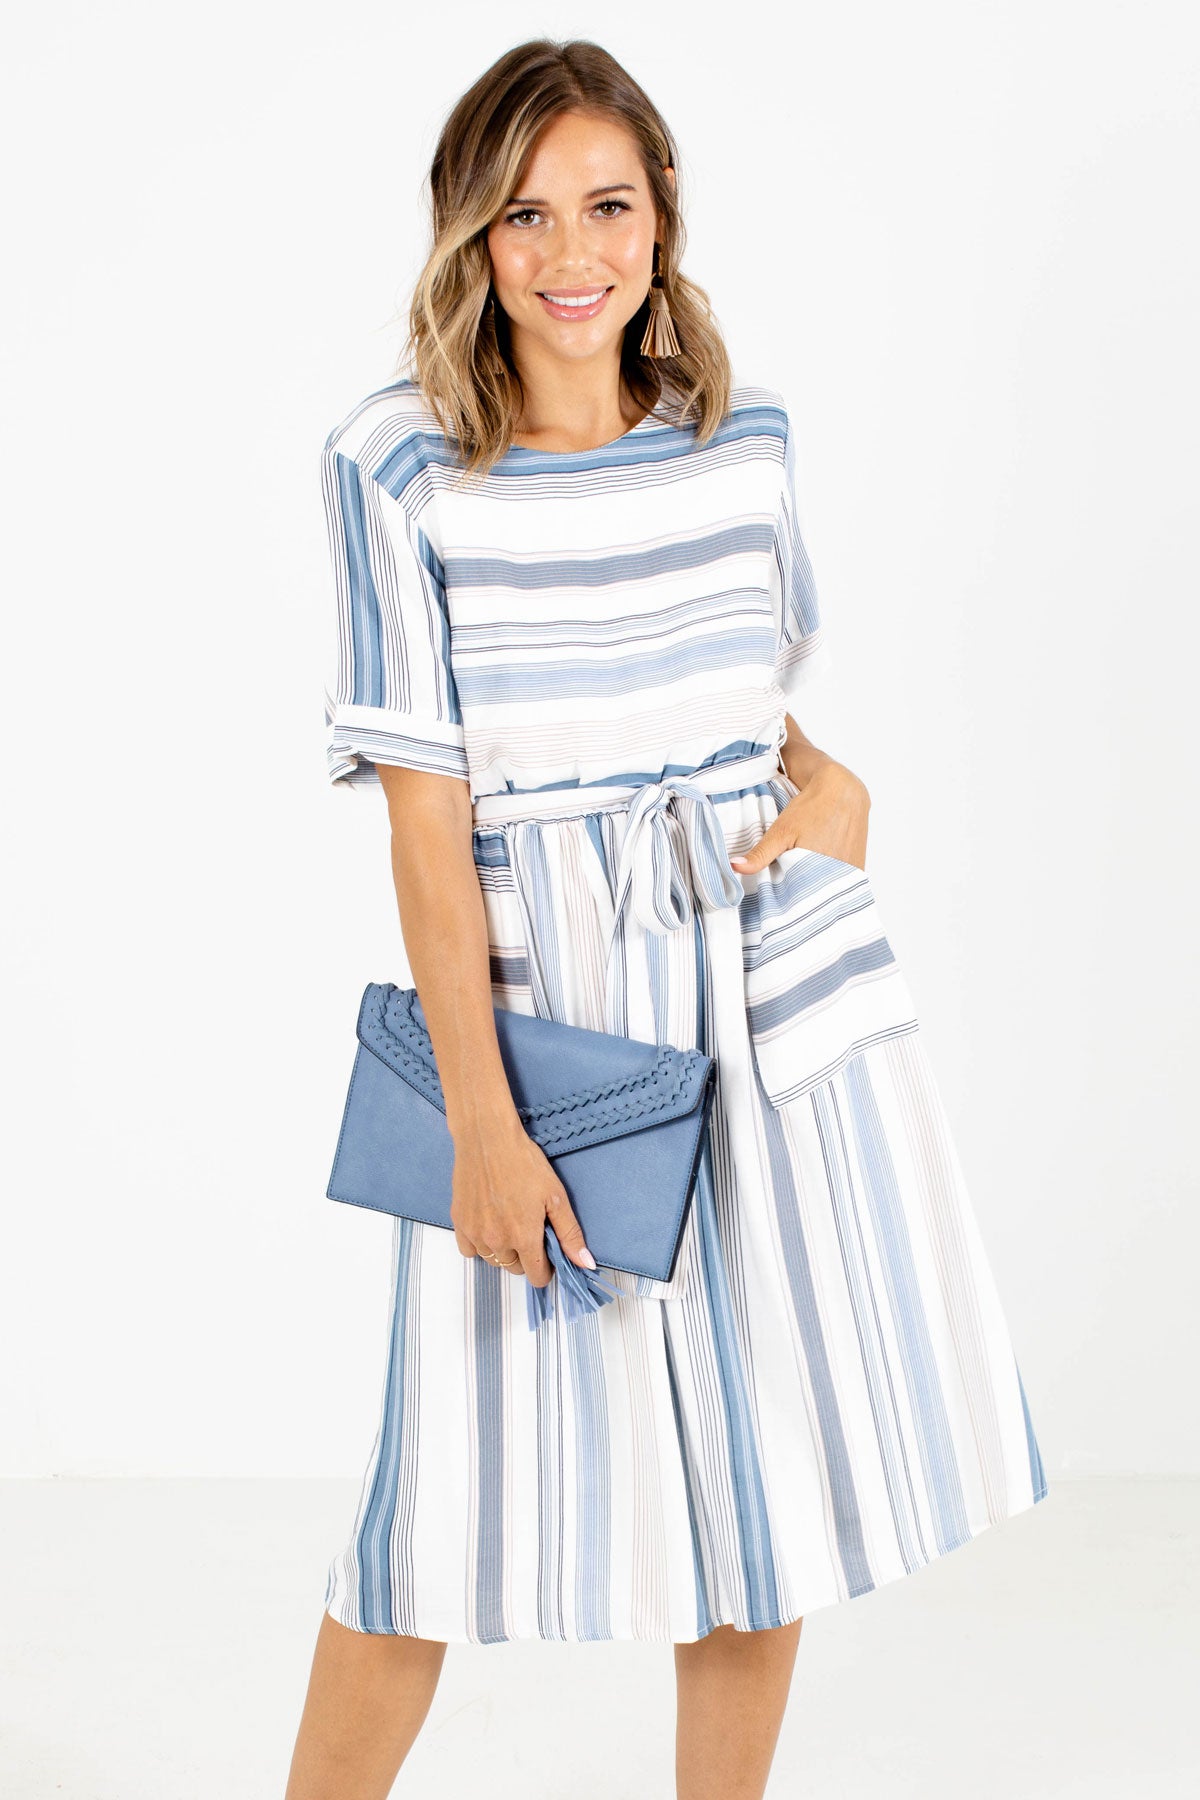 White and Blue Striped Patterned Boutique Knee-Length Dresses for Women